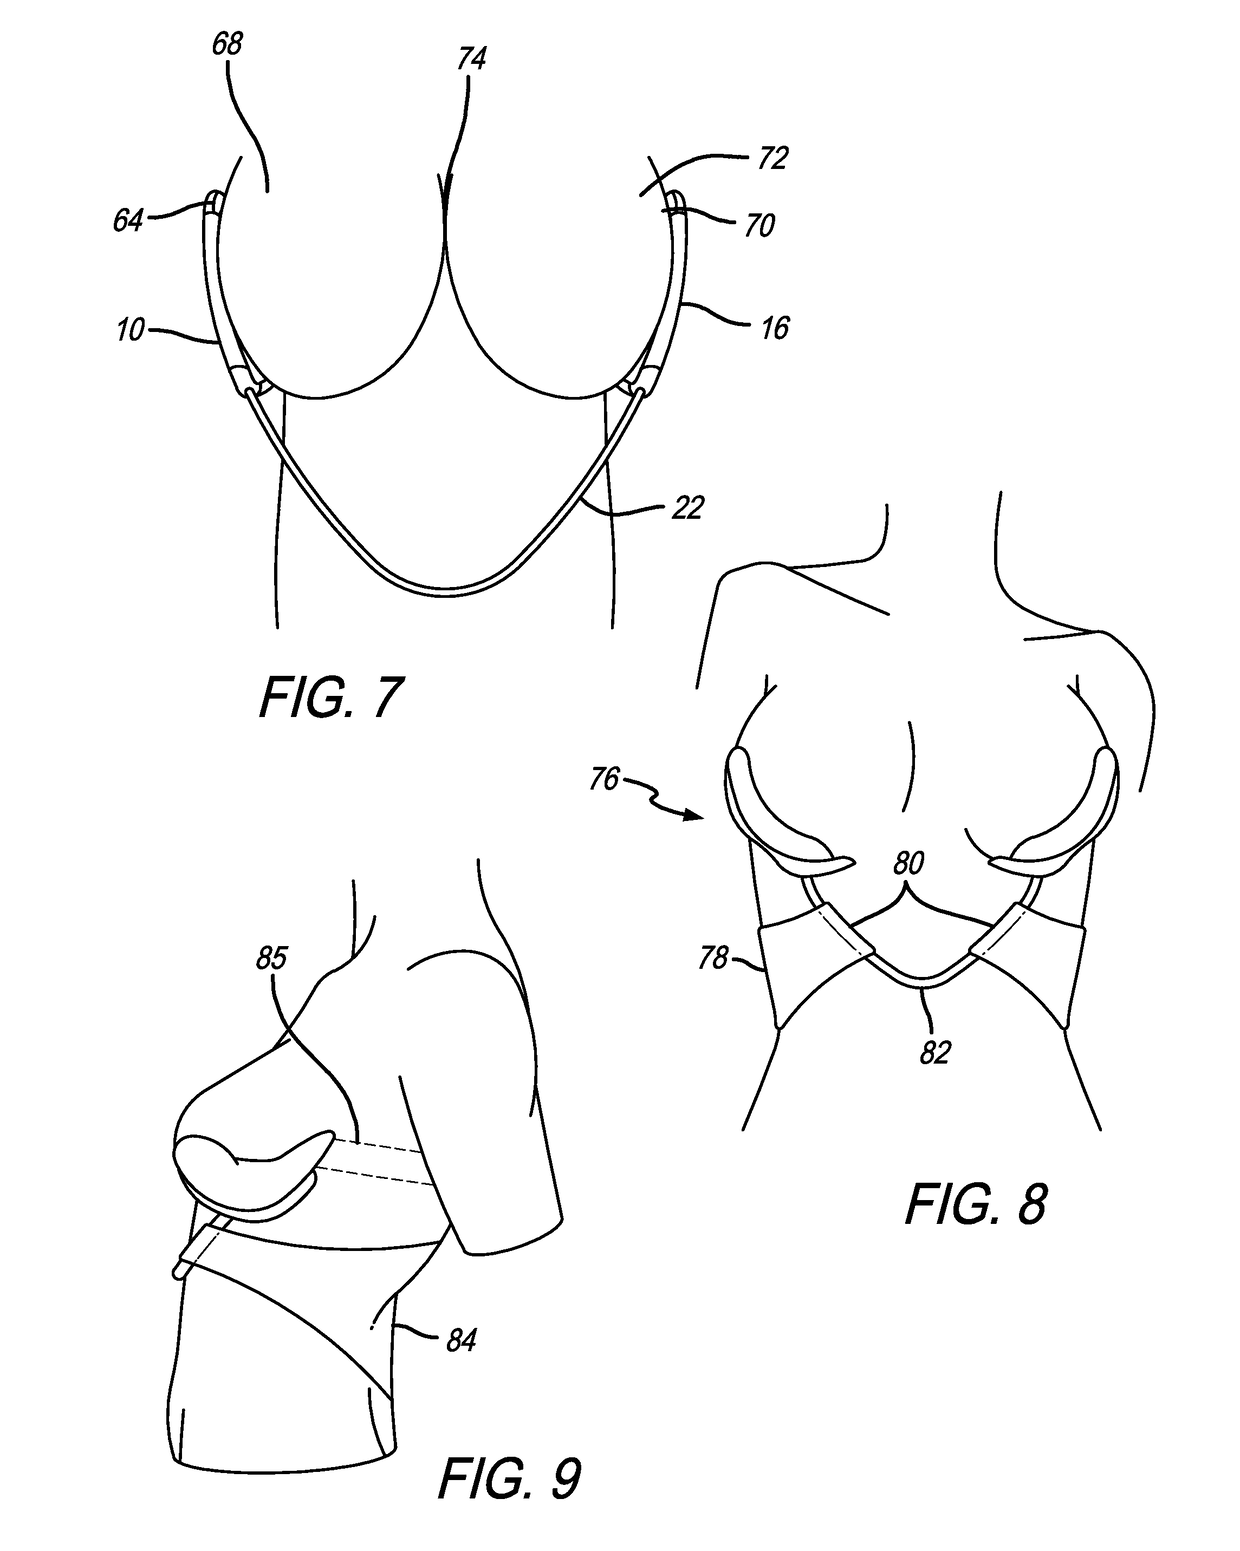 Cleavage enhancing undergarment system